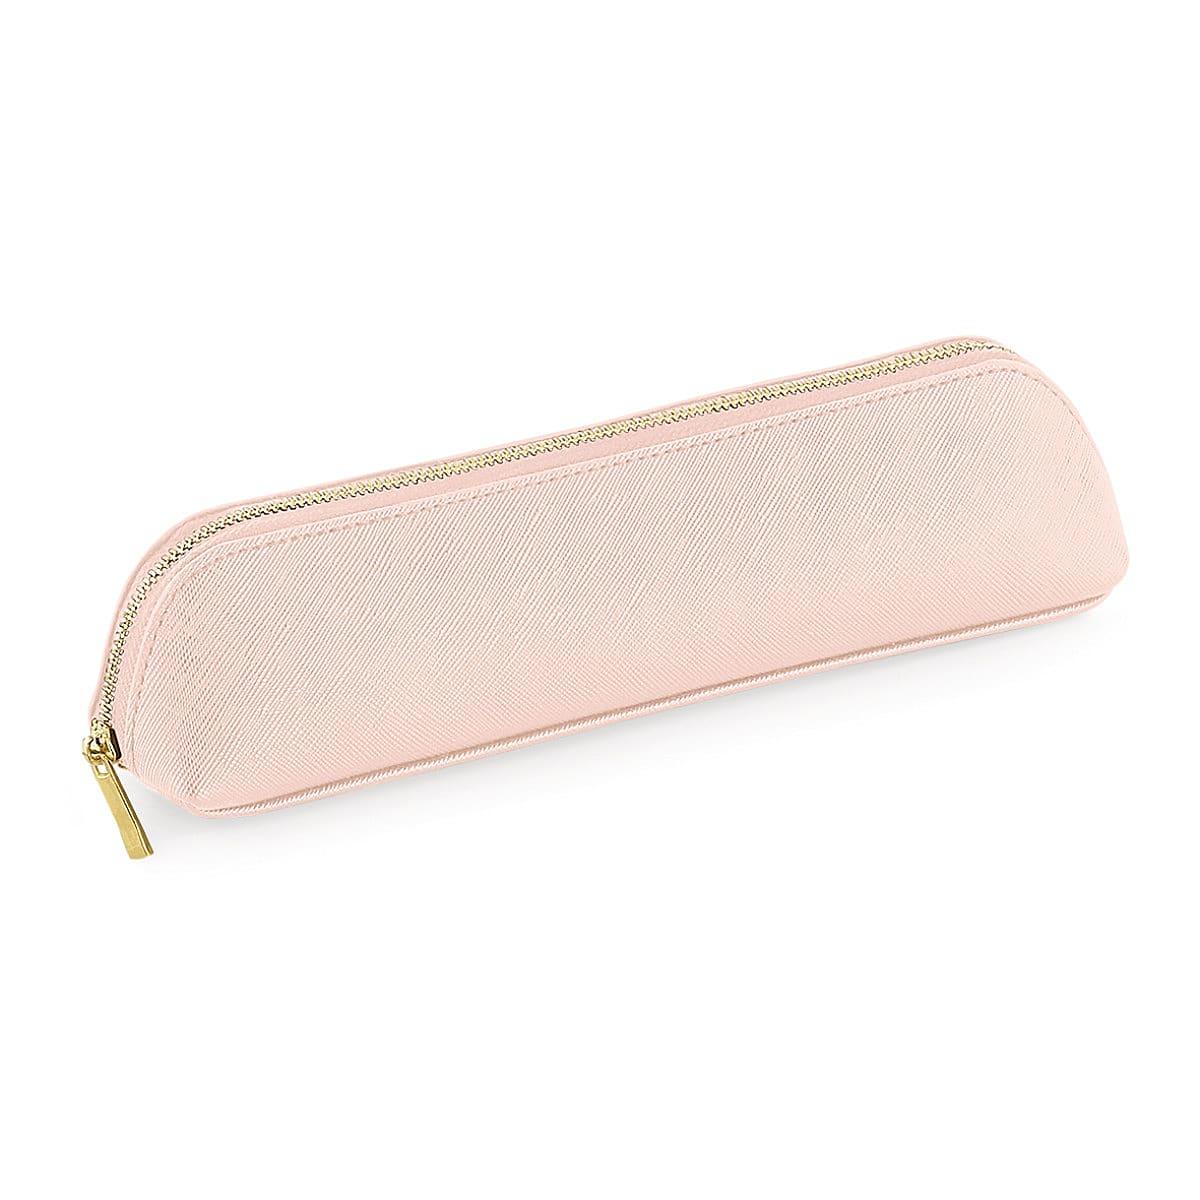 Bagbase Boutique Mini Accessory Case in Soft Pink (Product Code: BG752)